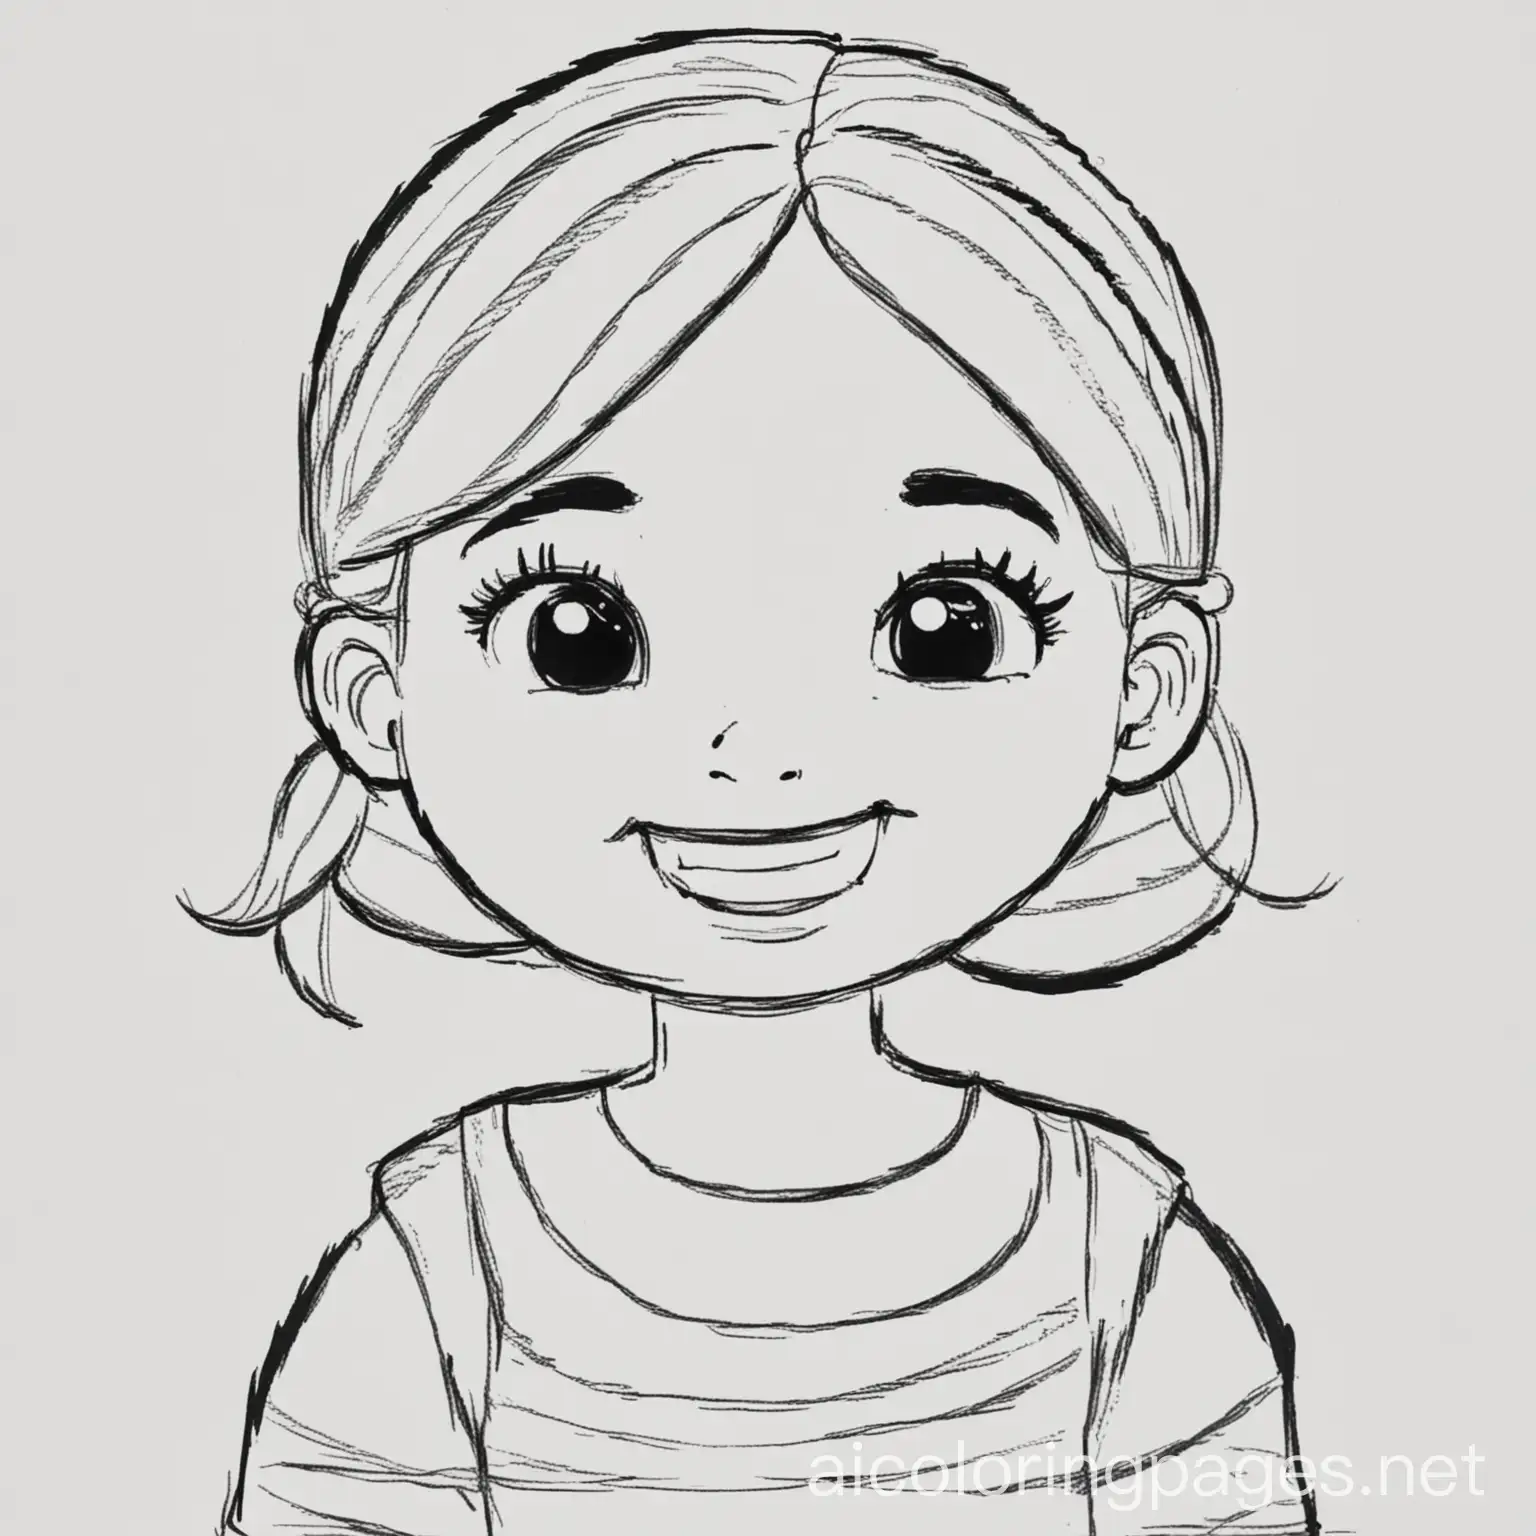 A picture of a happy little girl for a colouring page, Coloring Page, black and white, line art, white background, Simplicity, Ample White Space. The background of the coloring page is plain white to make it easy for young children to color within the lines. The outlines of all the subjects are easy to distinguish, making it simple for kids to color without too much difficulty